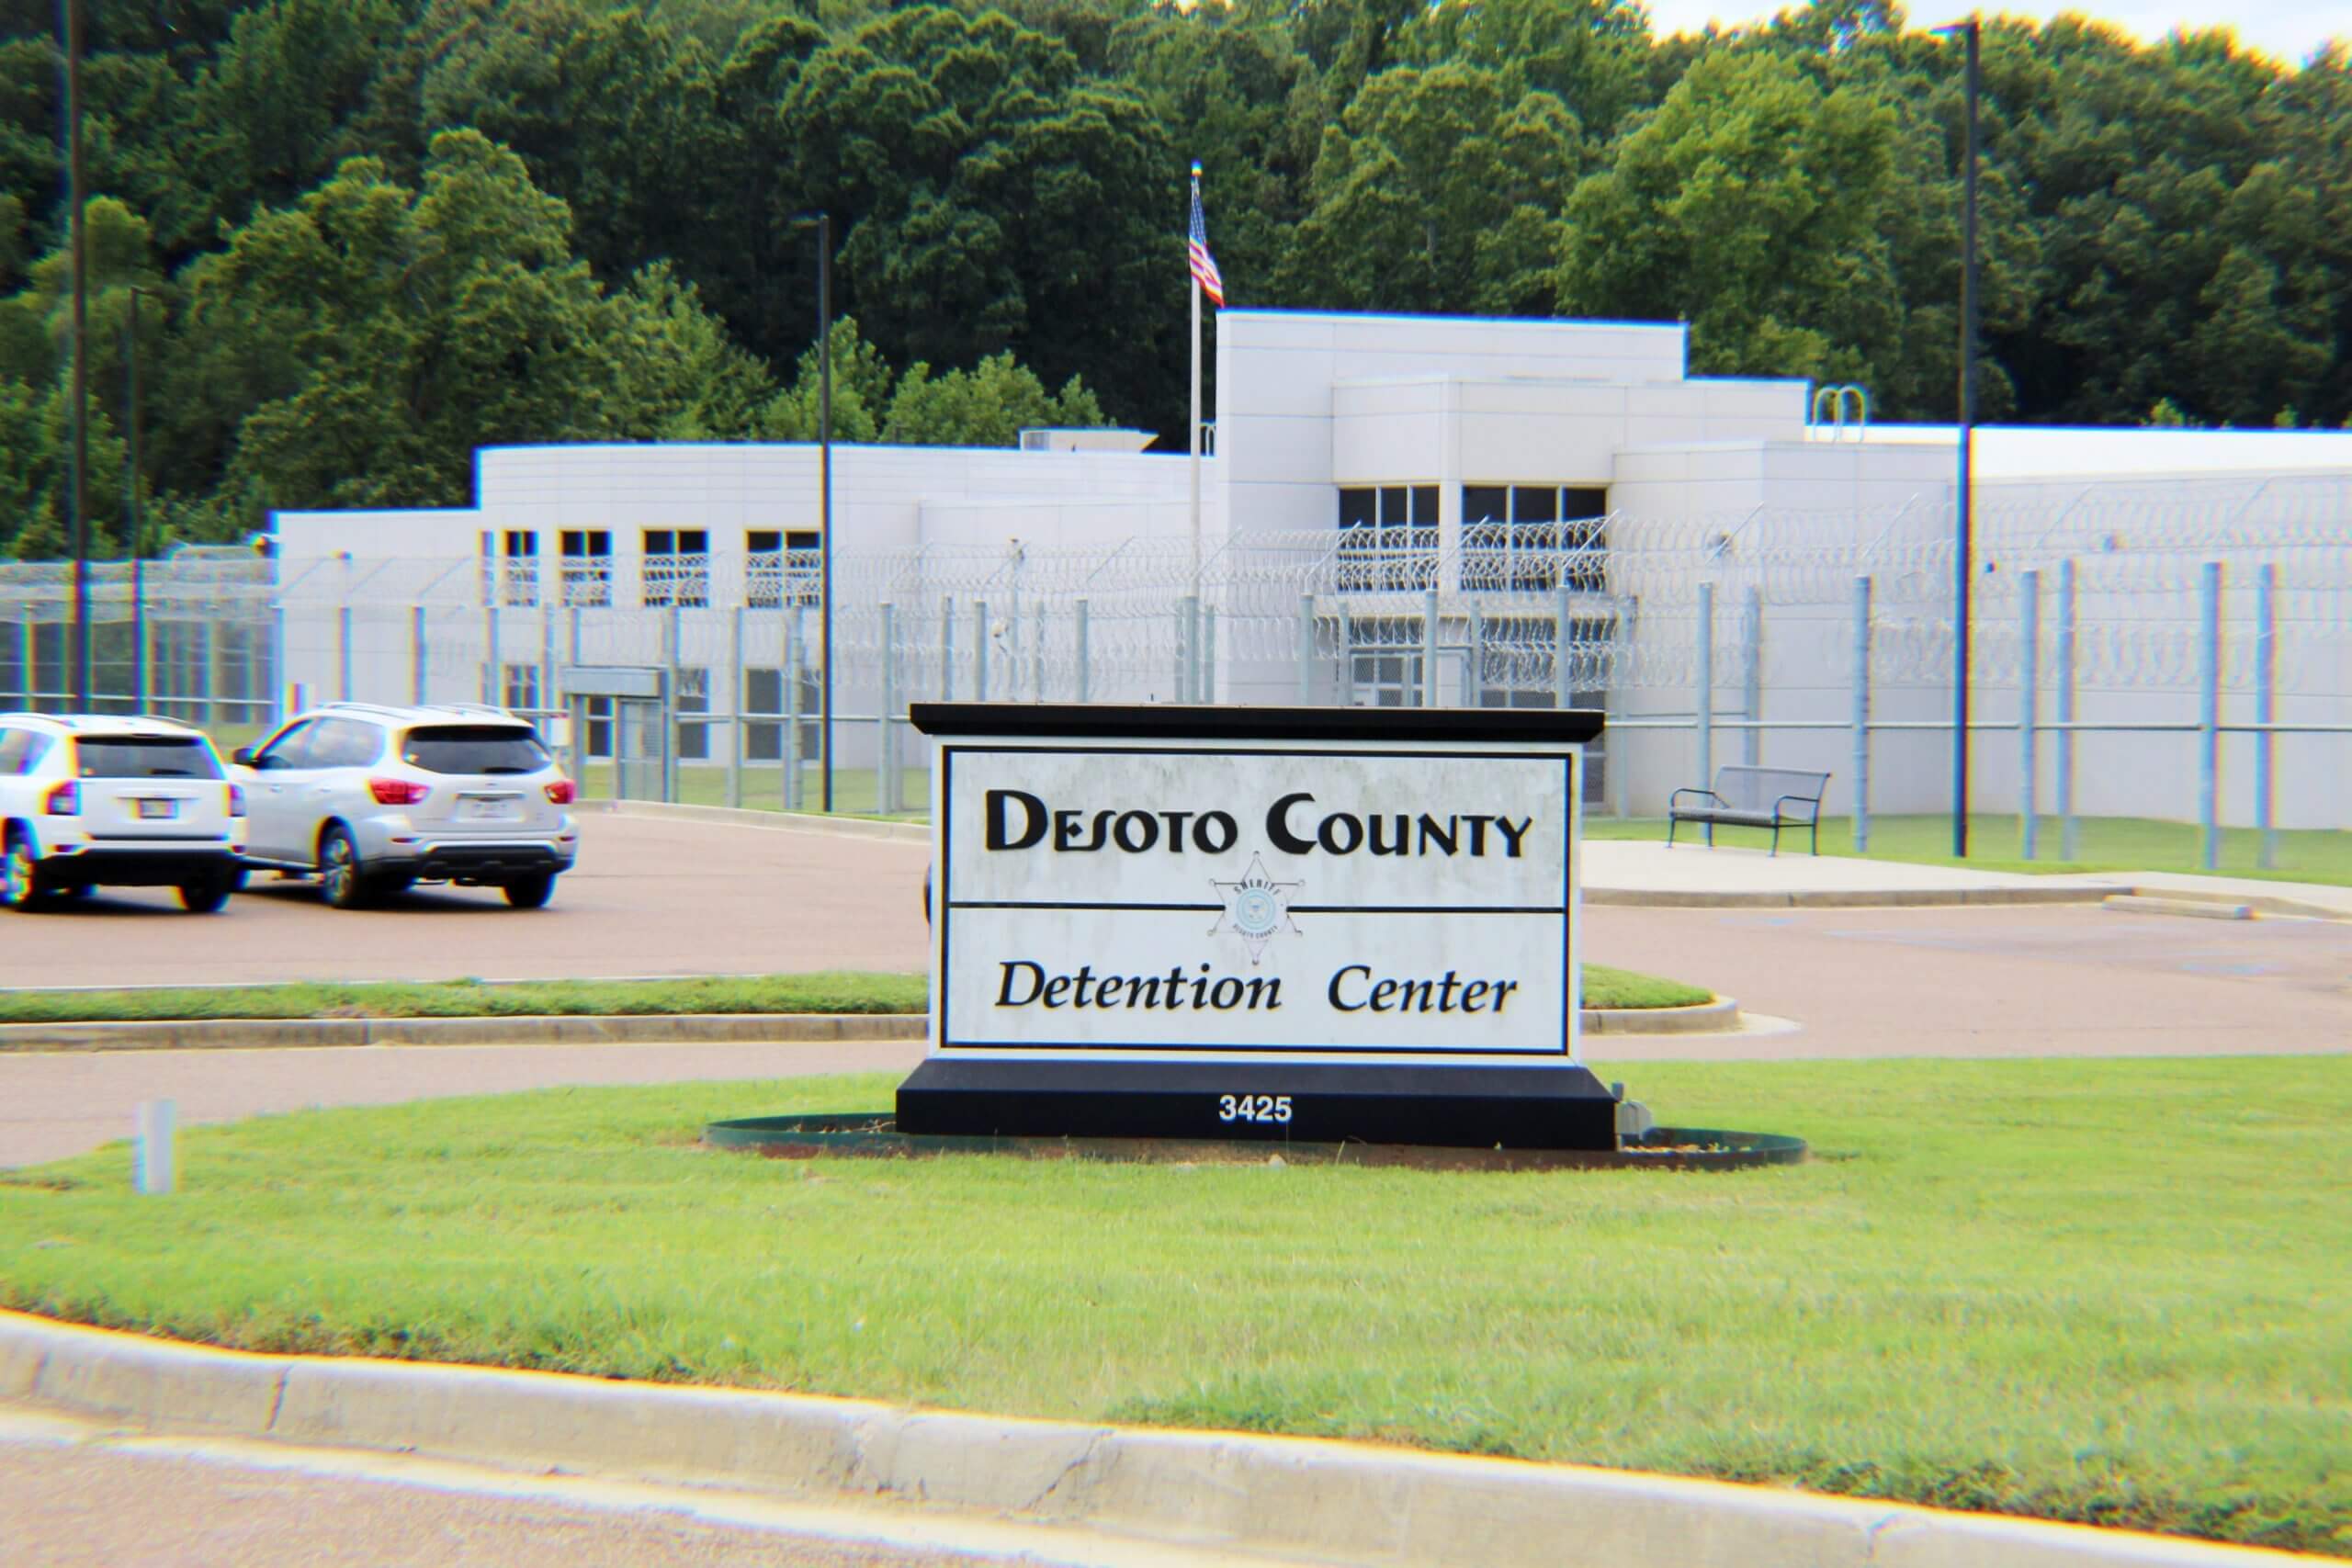 Additional positive cases found in jail testing